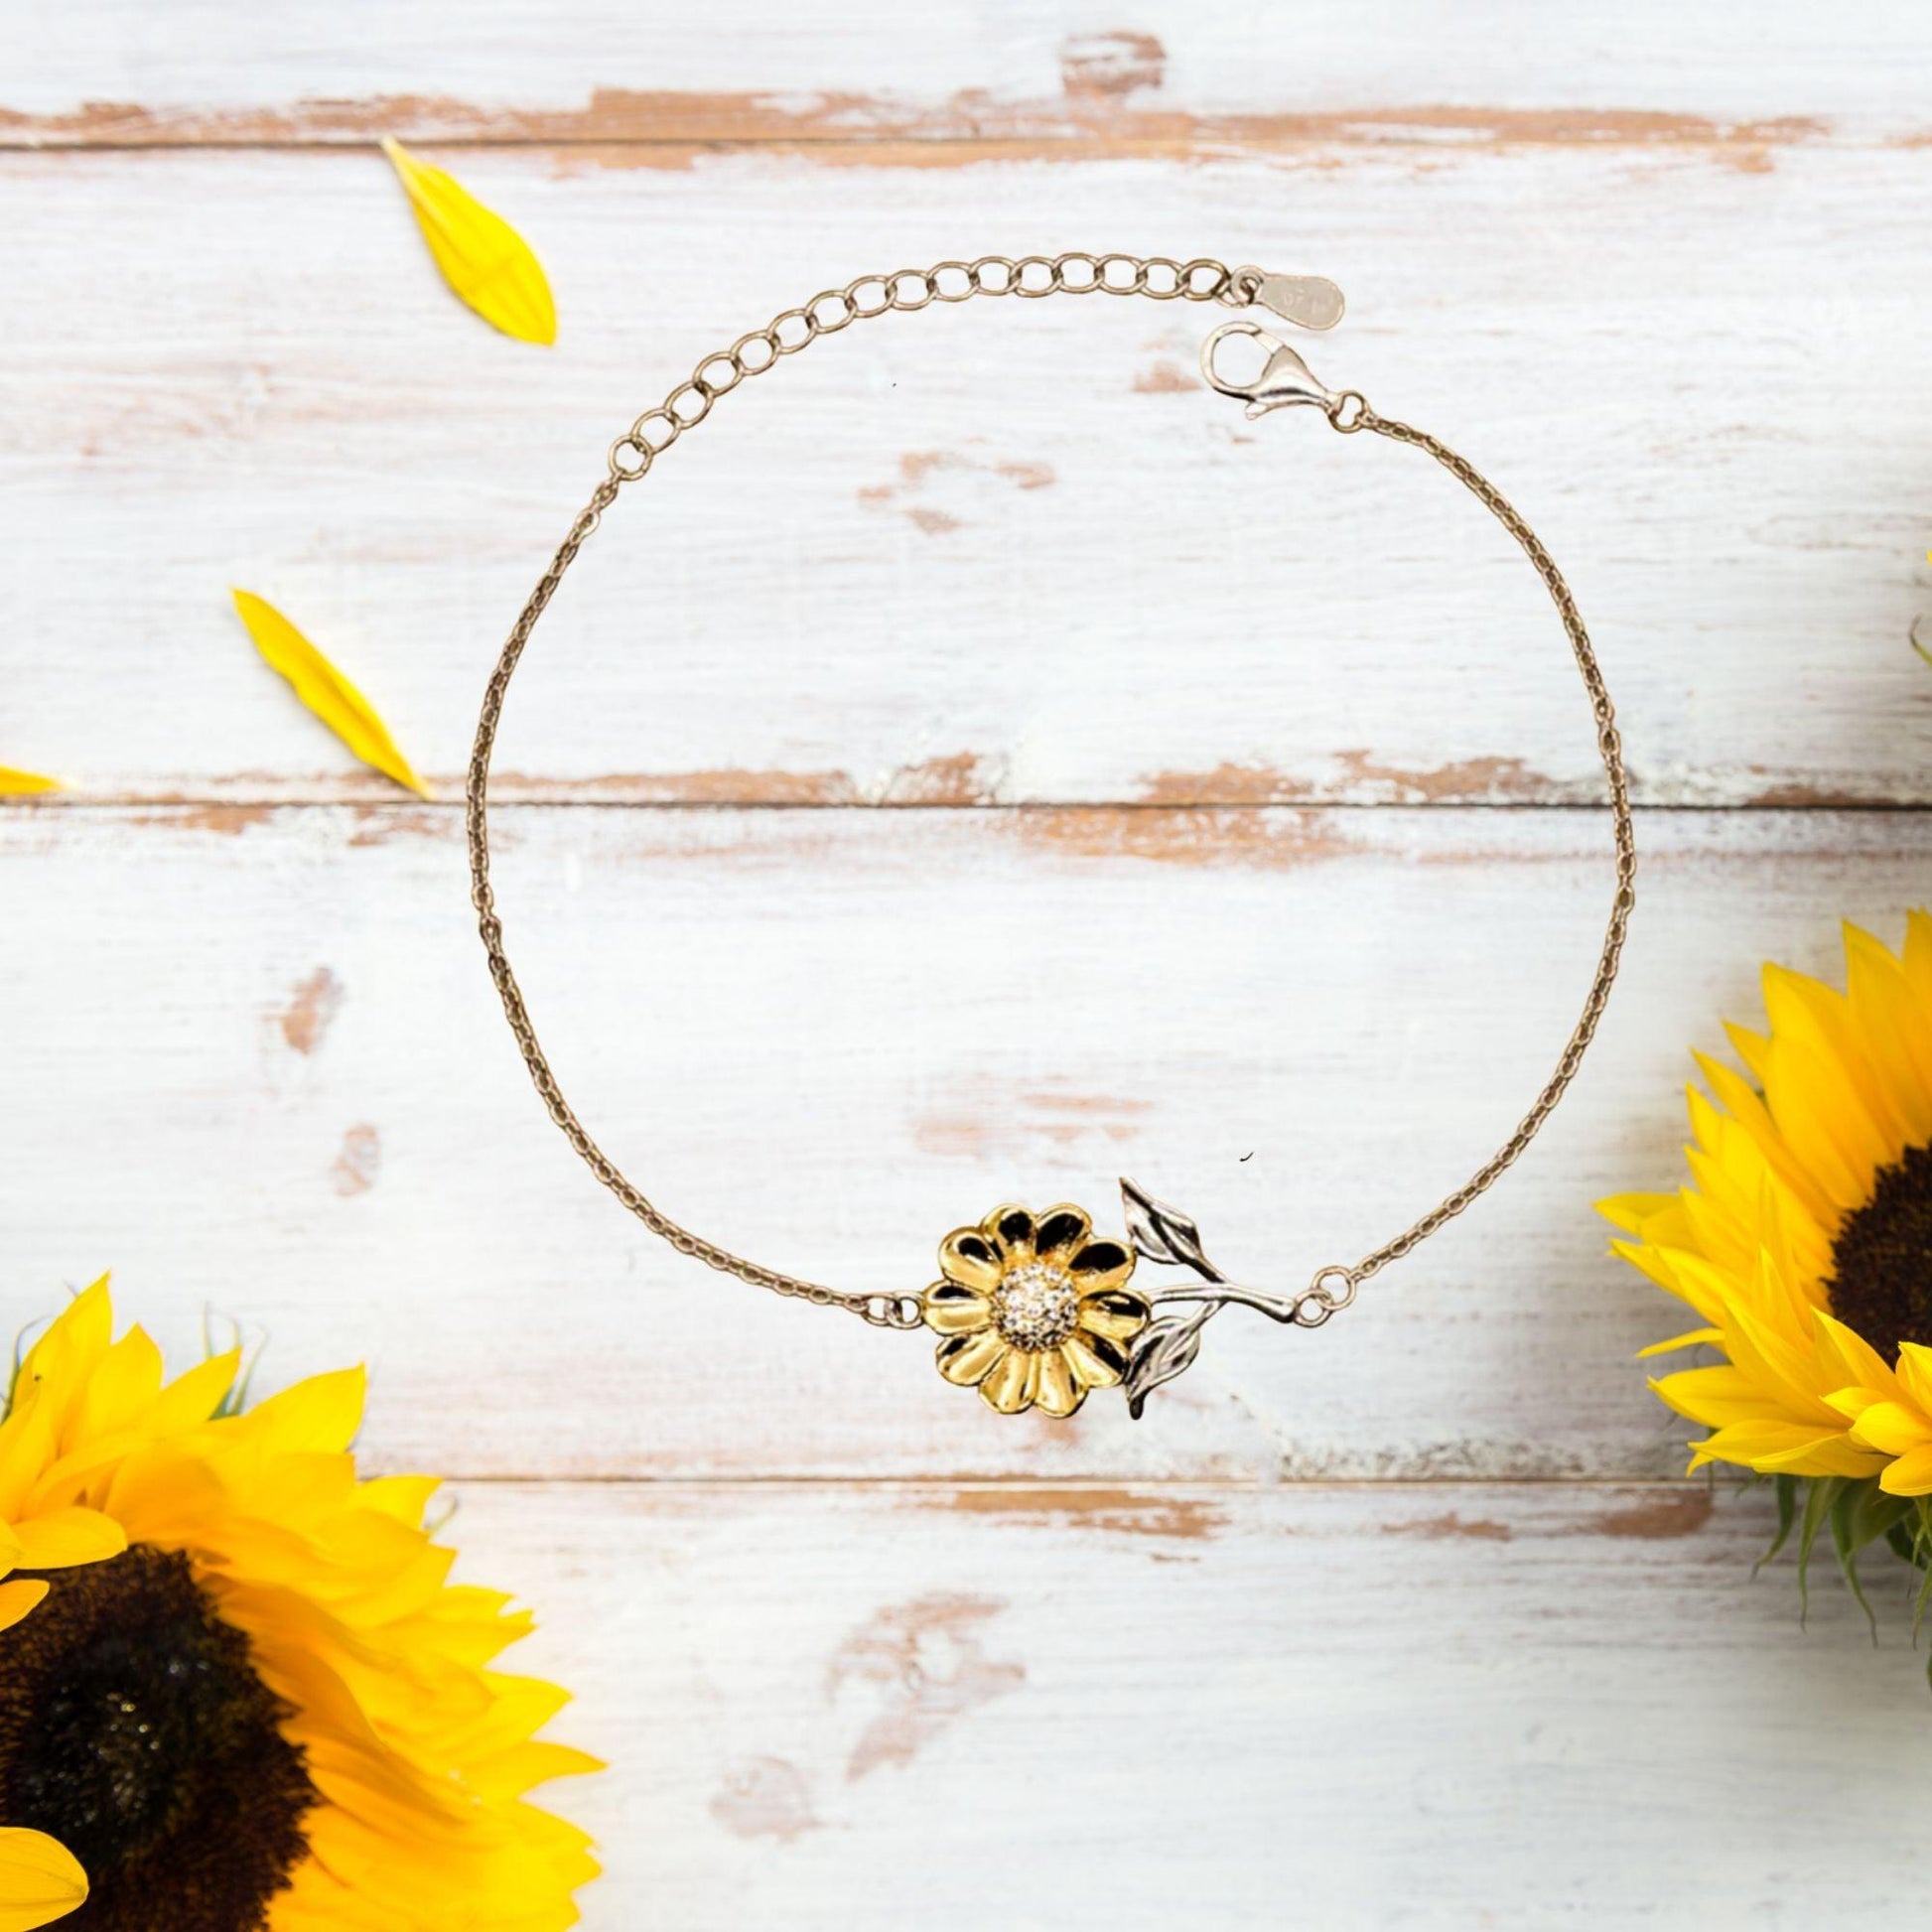 Groundskeeper Sunflower Bracelet - Thanks for being who you are - Birthday Christmas Jewelry Gifts Coworkers Colleague Boss - Mallard Moon Gift Shop